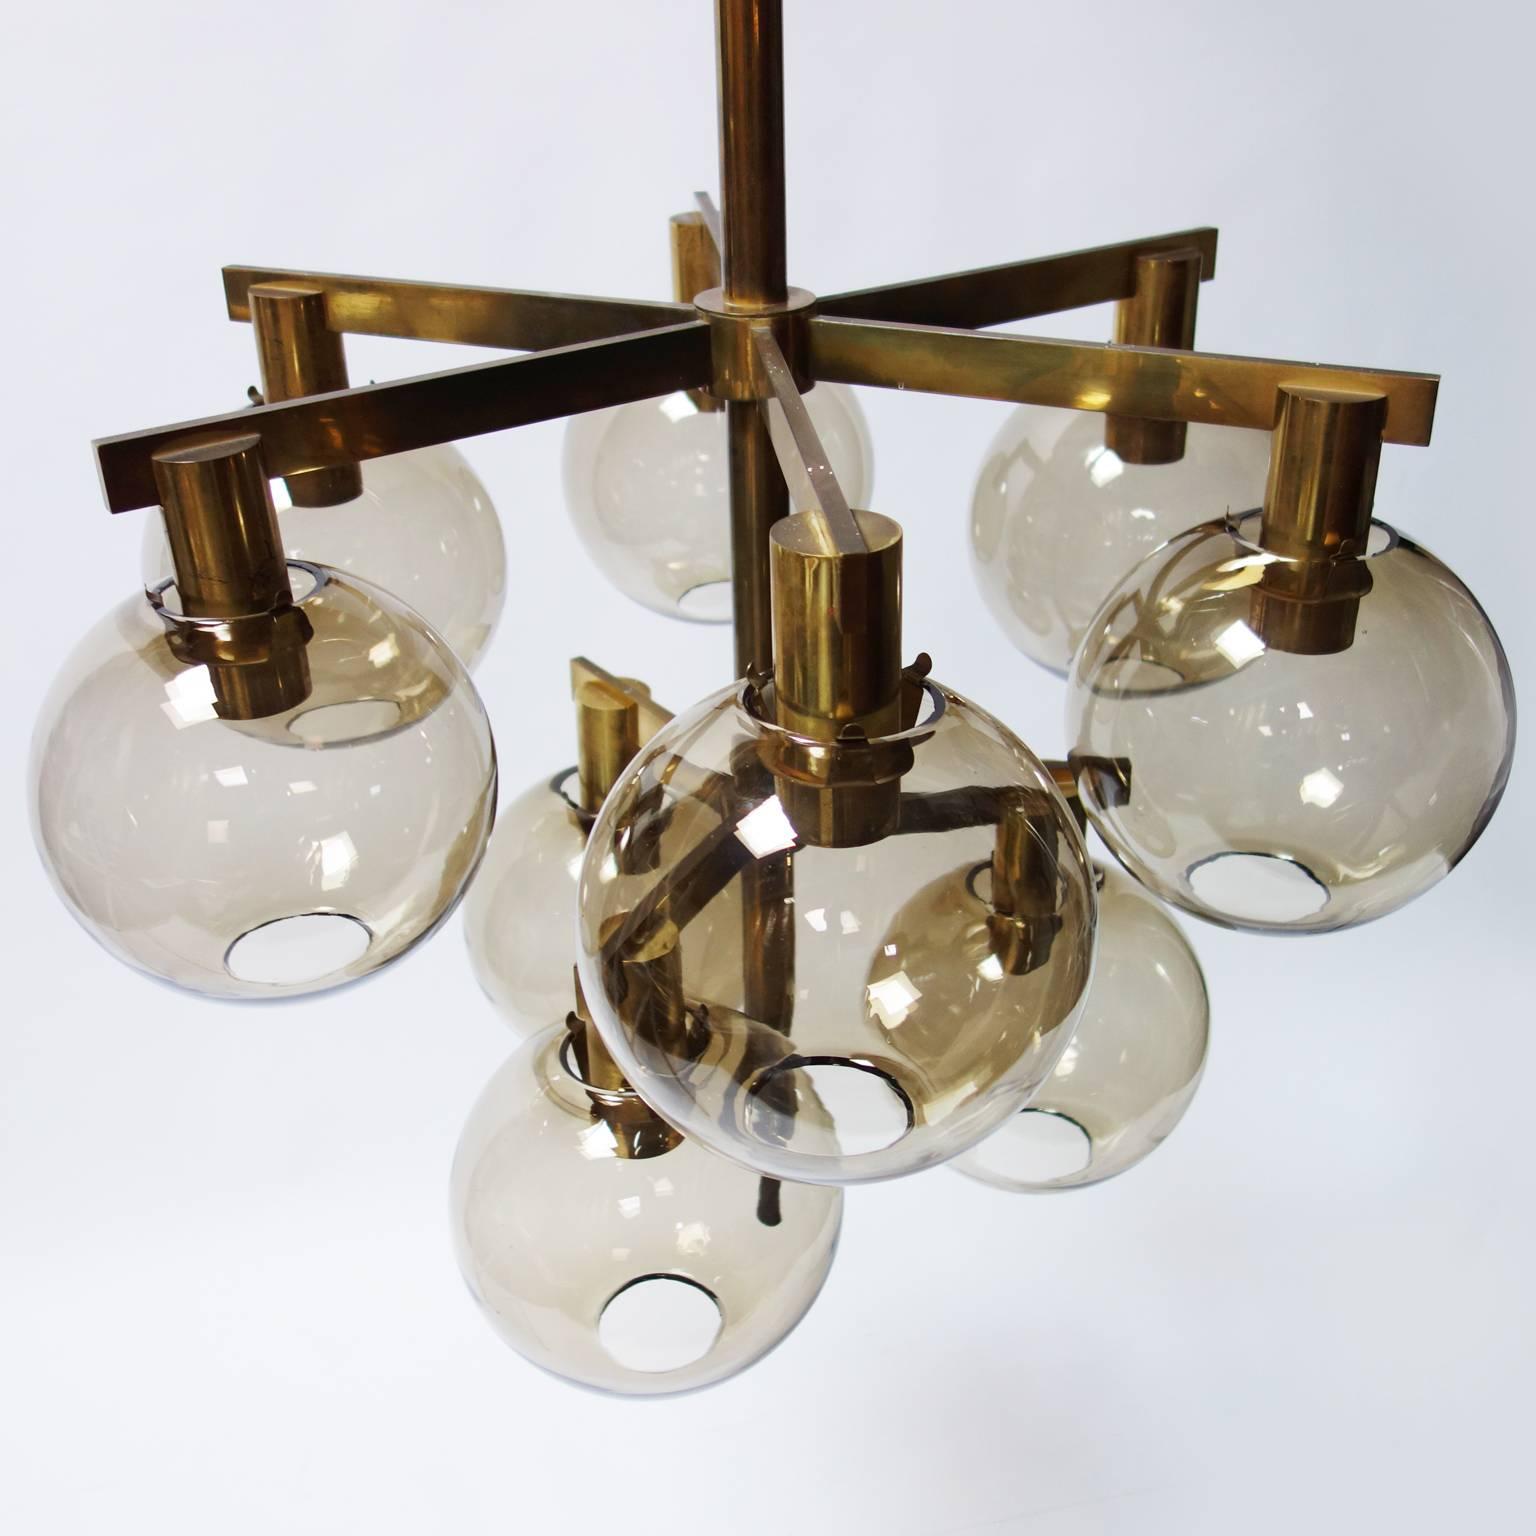 Fantastic large scale hanging fixture in brass with nine lights and smoked glass globes. 

Designed by Hans-Agne Jakobsson for Markaryd.

Original patina, could be polished to be really shiny, if requested.